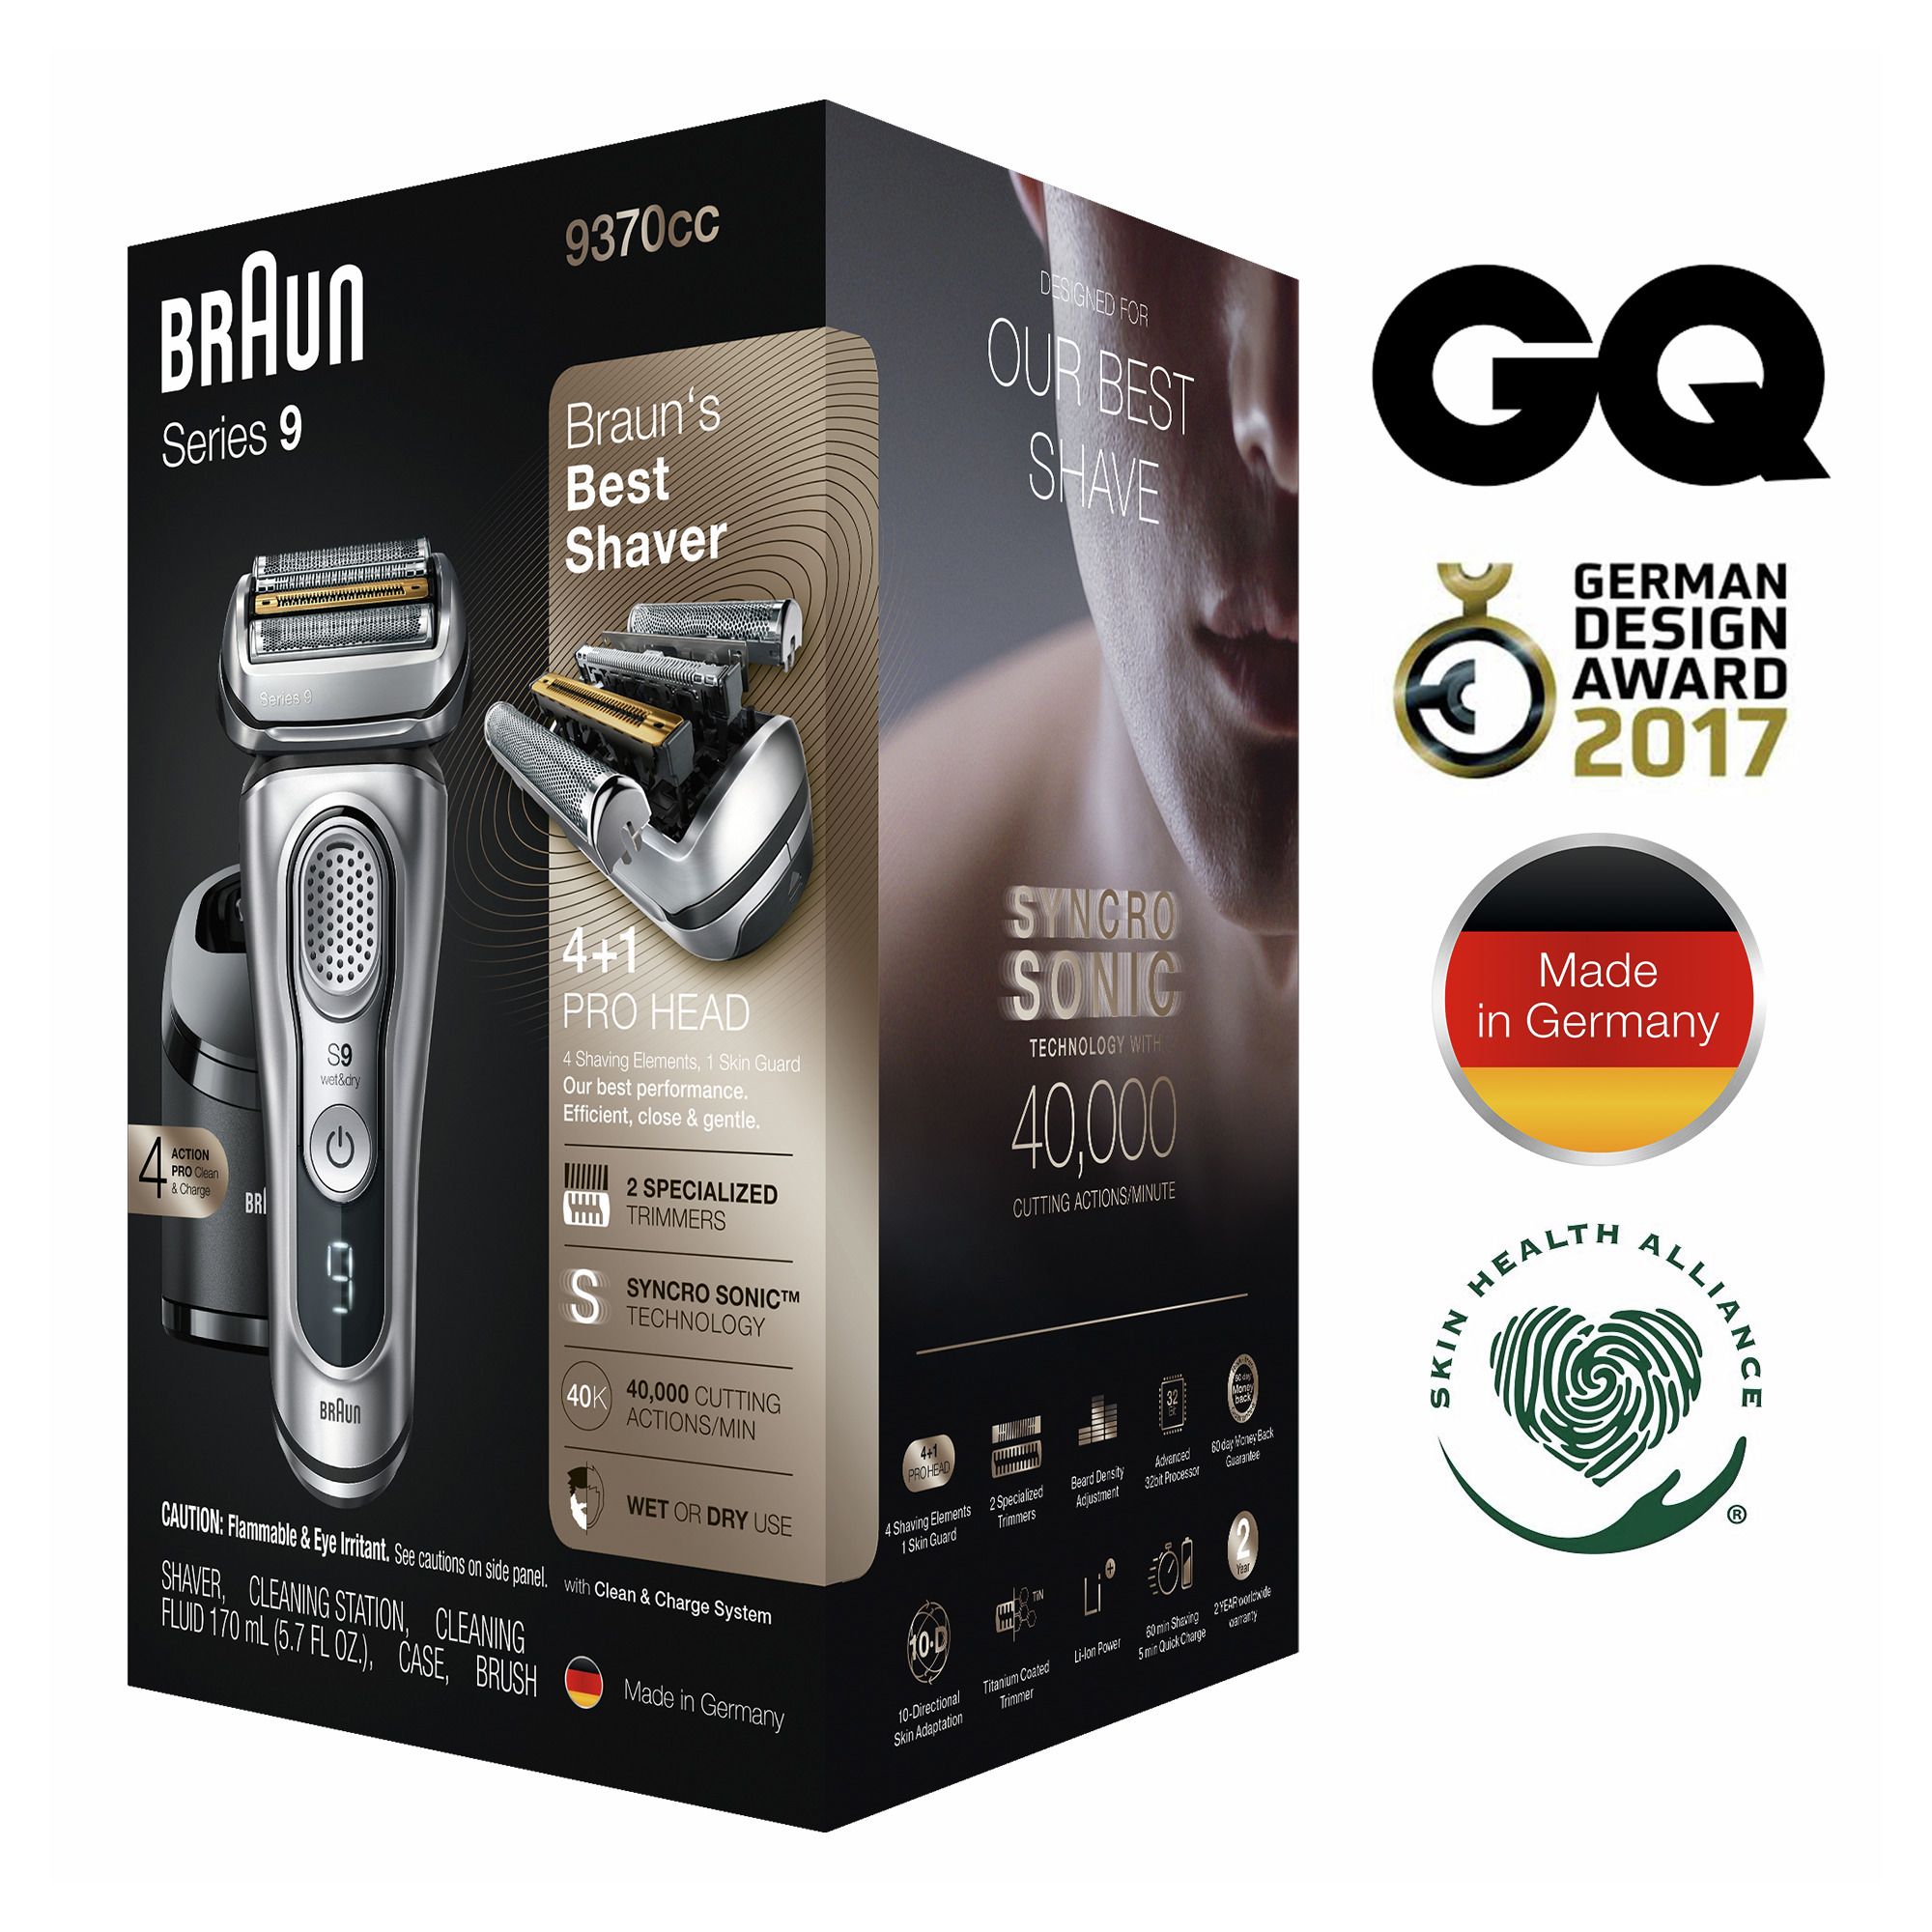 Braun Series 9 Sport + Electric Shaver with Clean and Charge Station